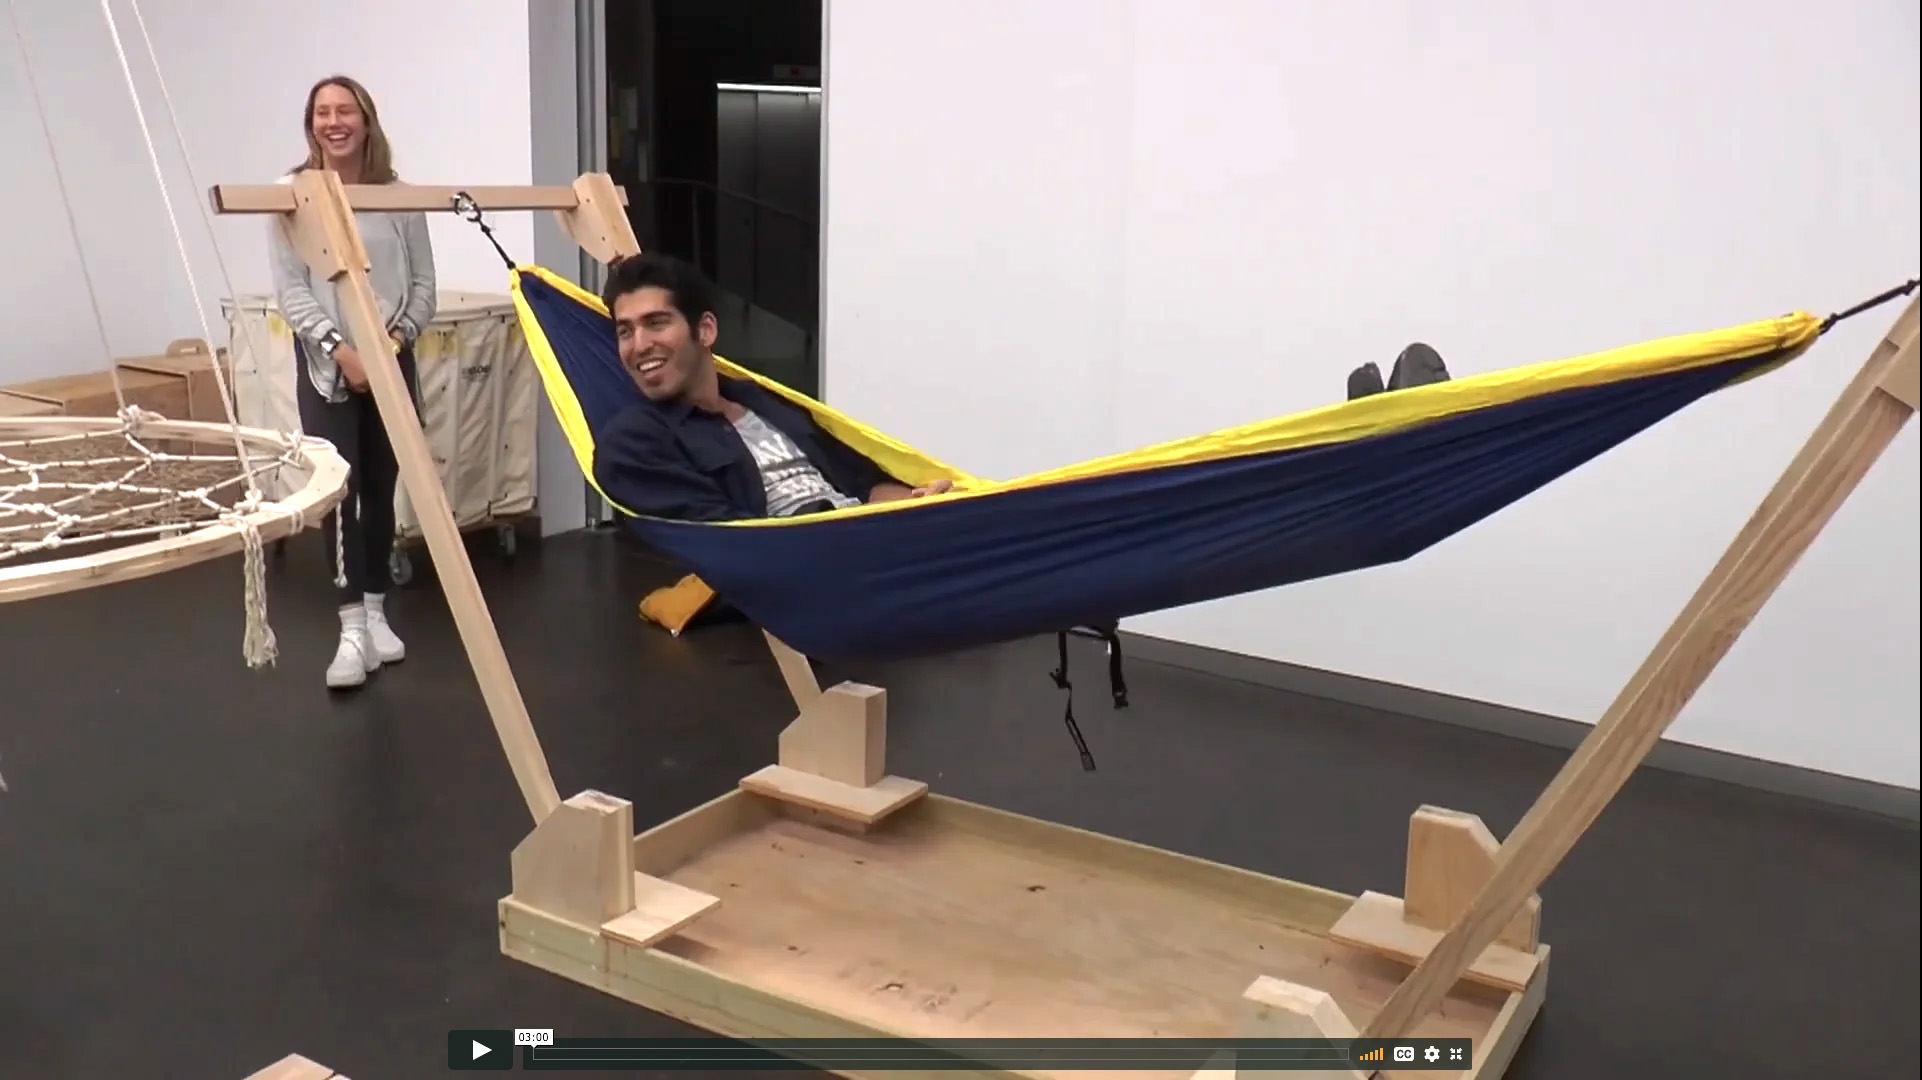 Student lies in hammock while classmate stands nearby